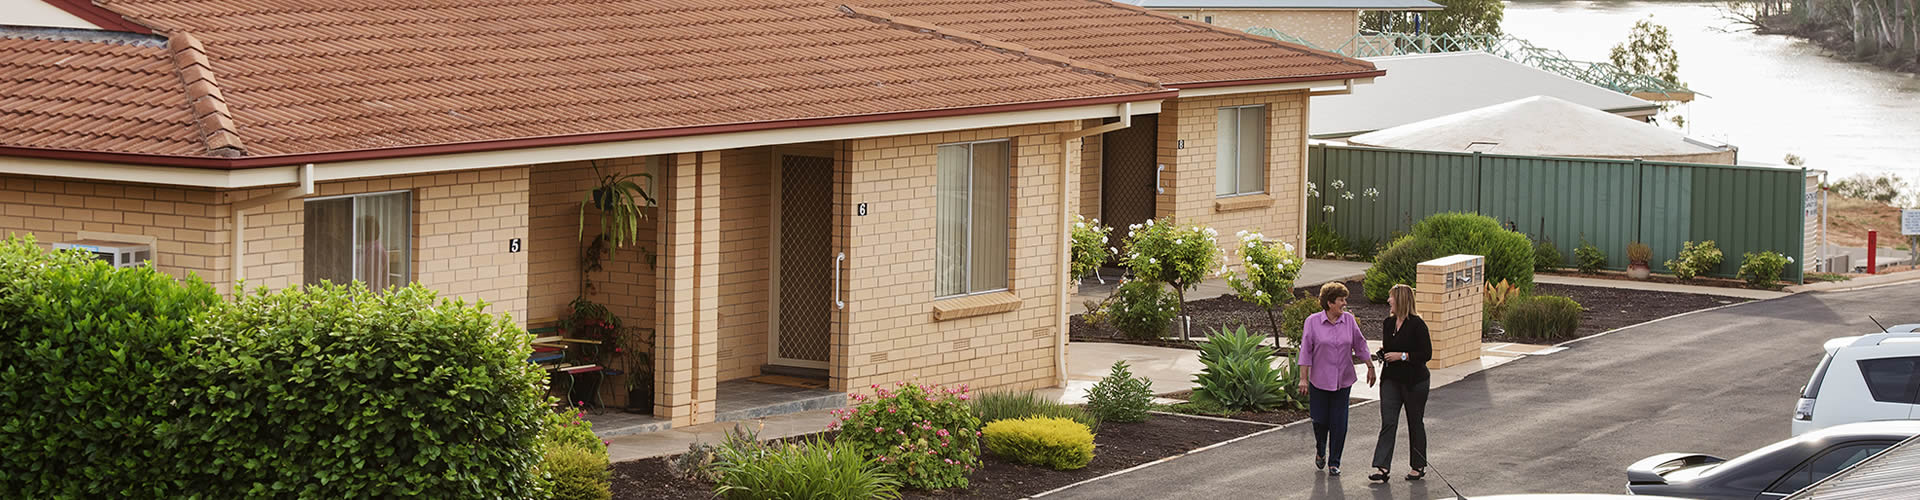 Independent Living Units Loxton - The Cottages